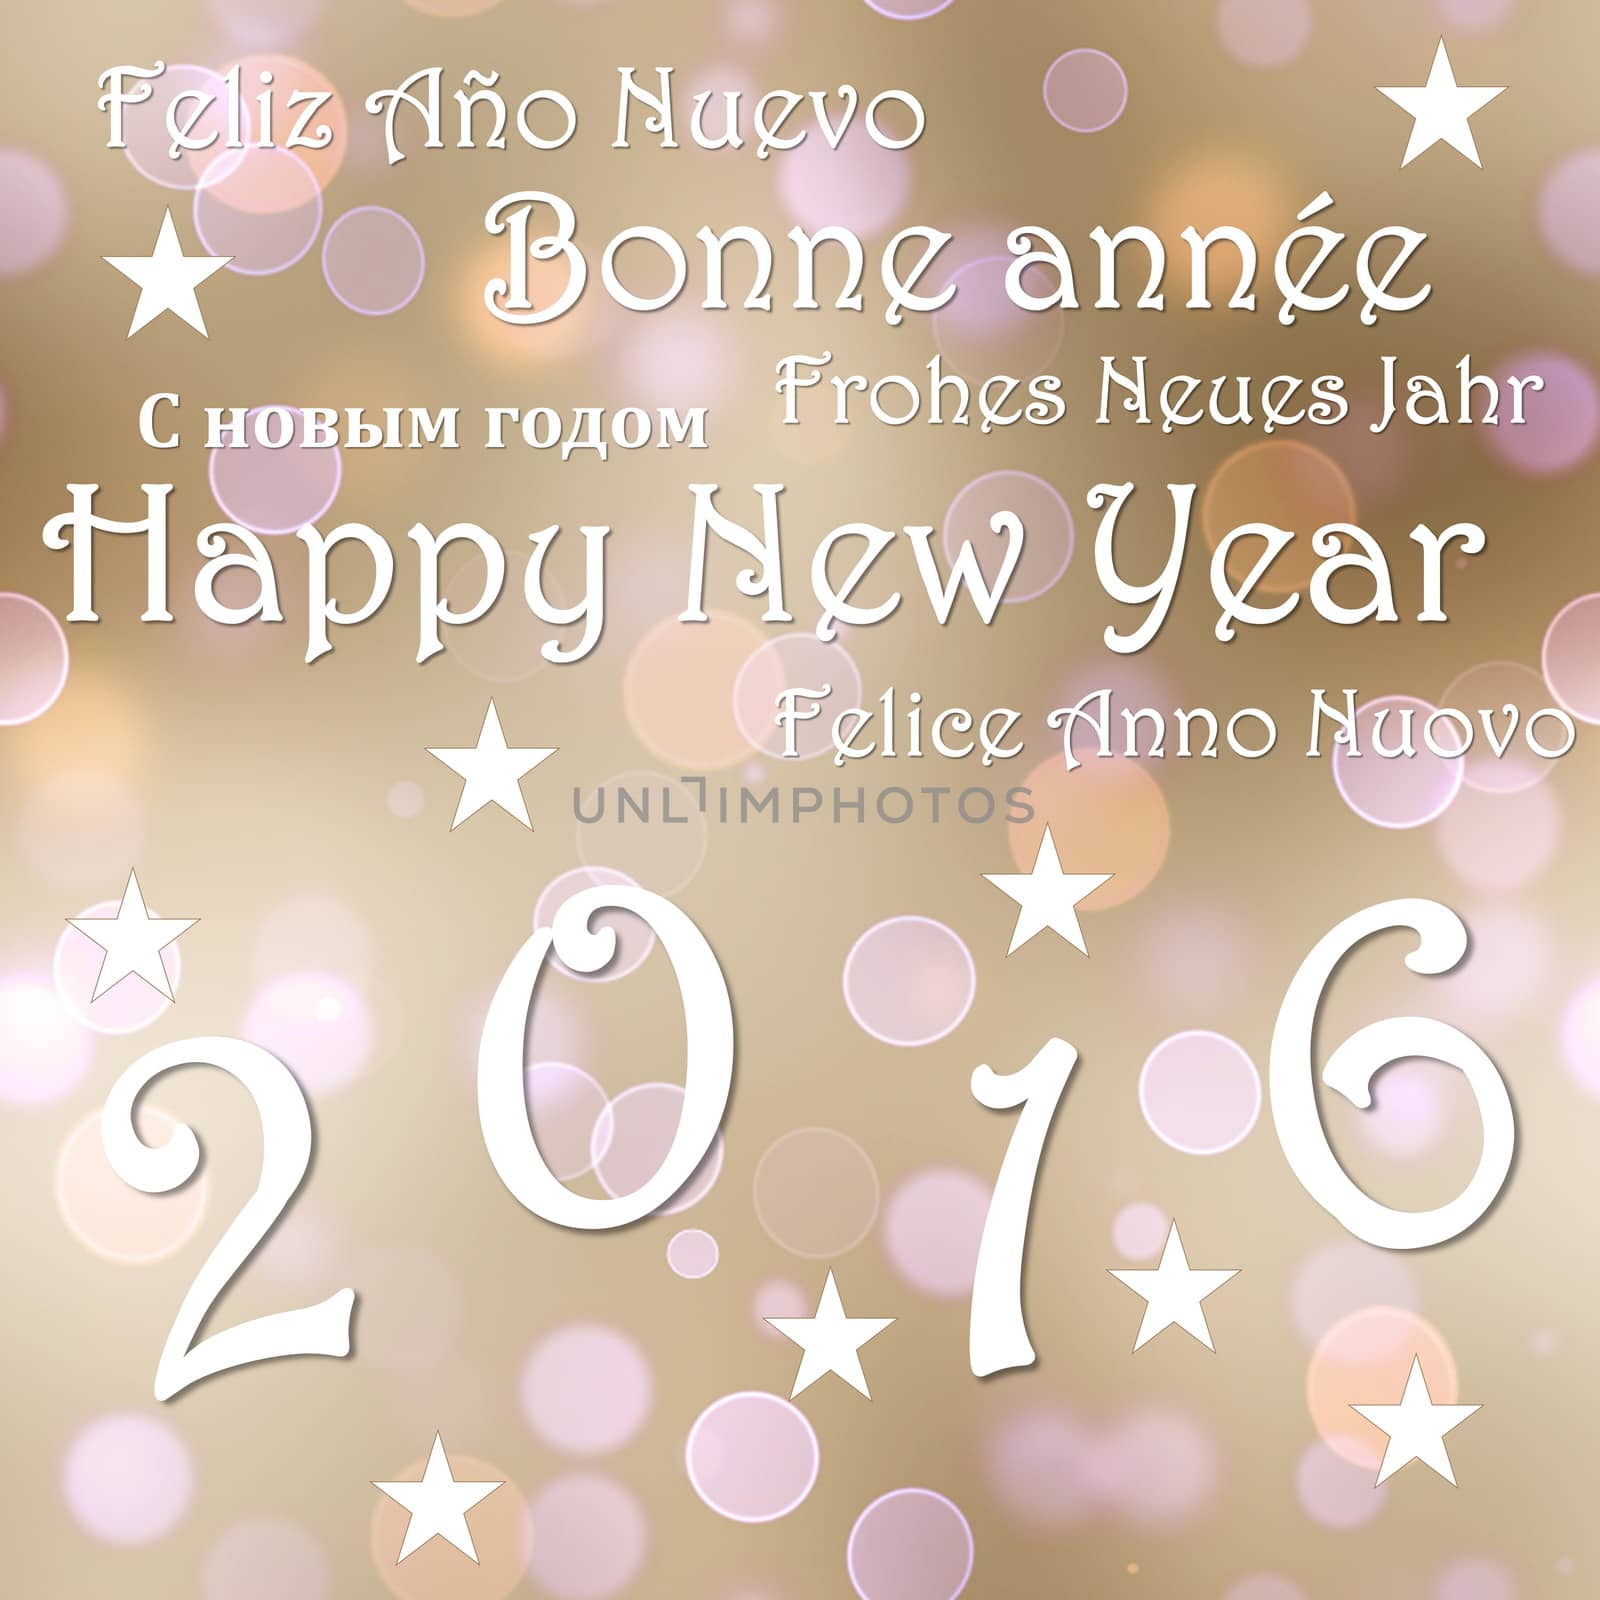 Happy new year 2016 - 3D render by Elenaphotos21